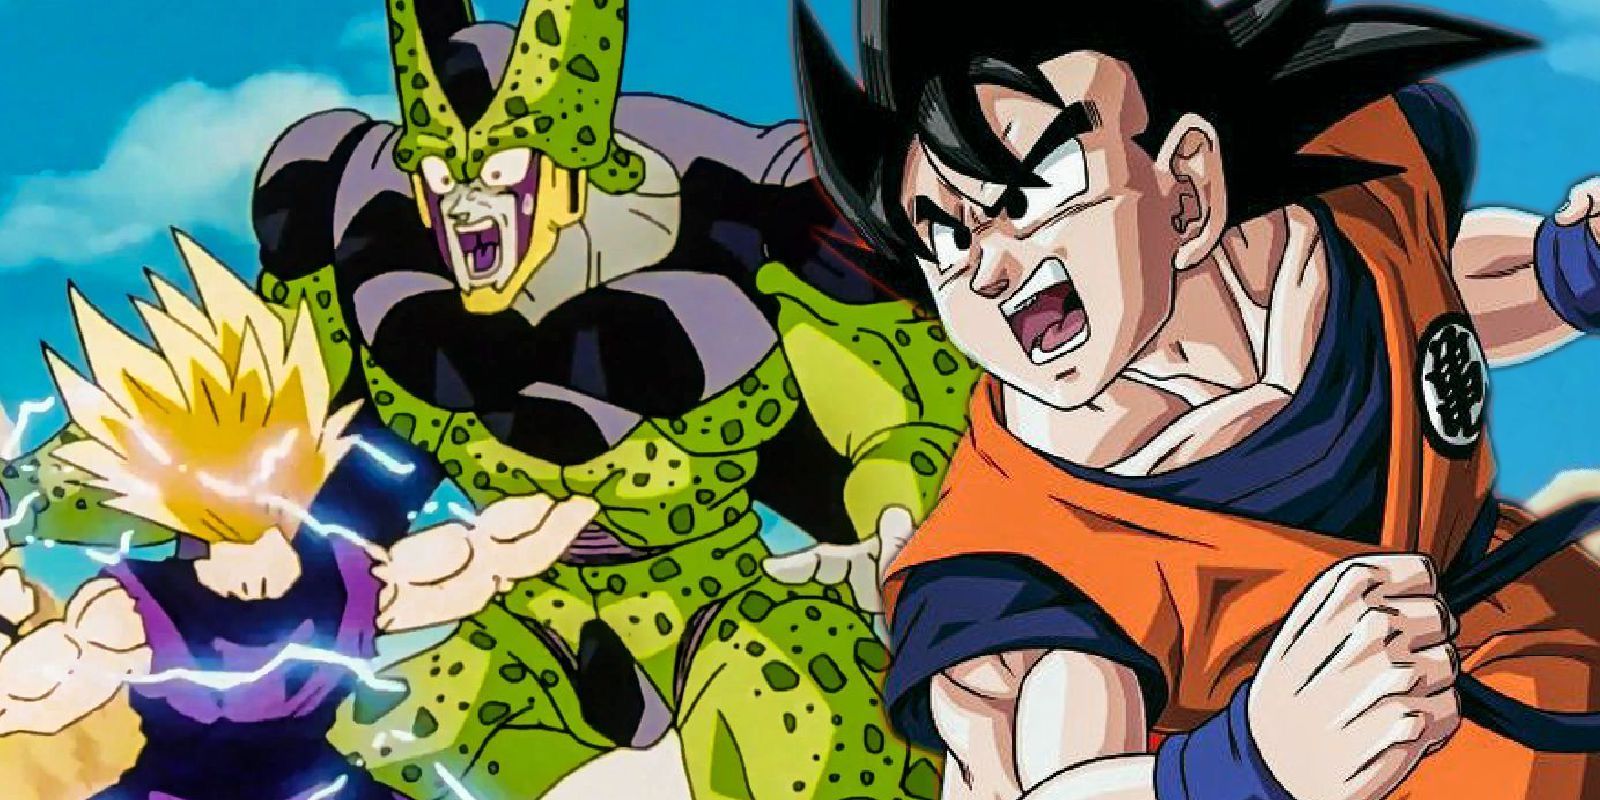 Top Ten Dragon Ball Villians  AFA: Animation For Adults : Animation News,  Reviews, Articles, Podcasts and More